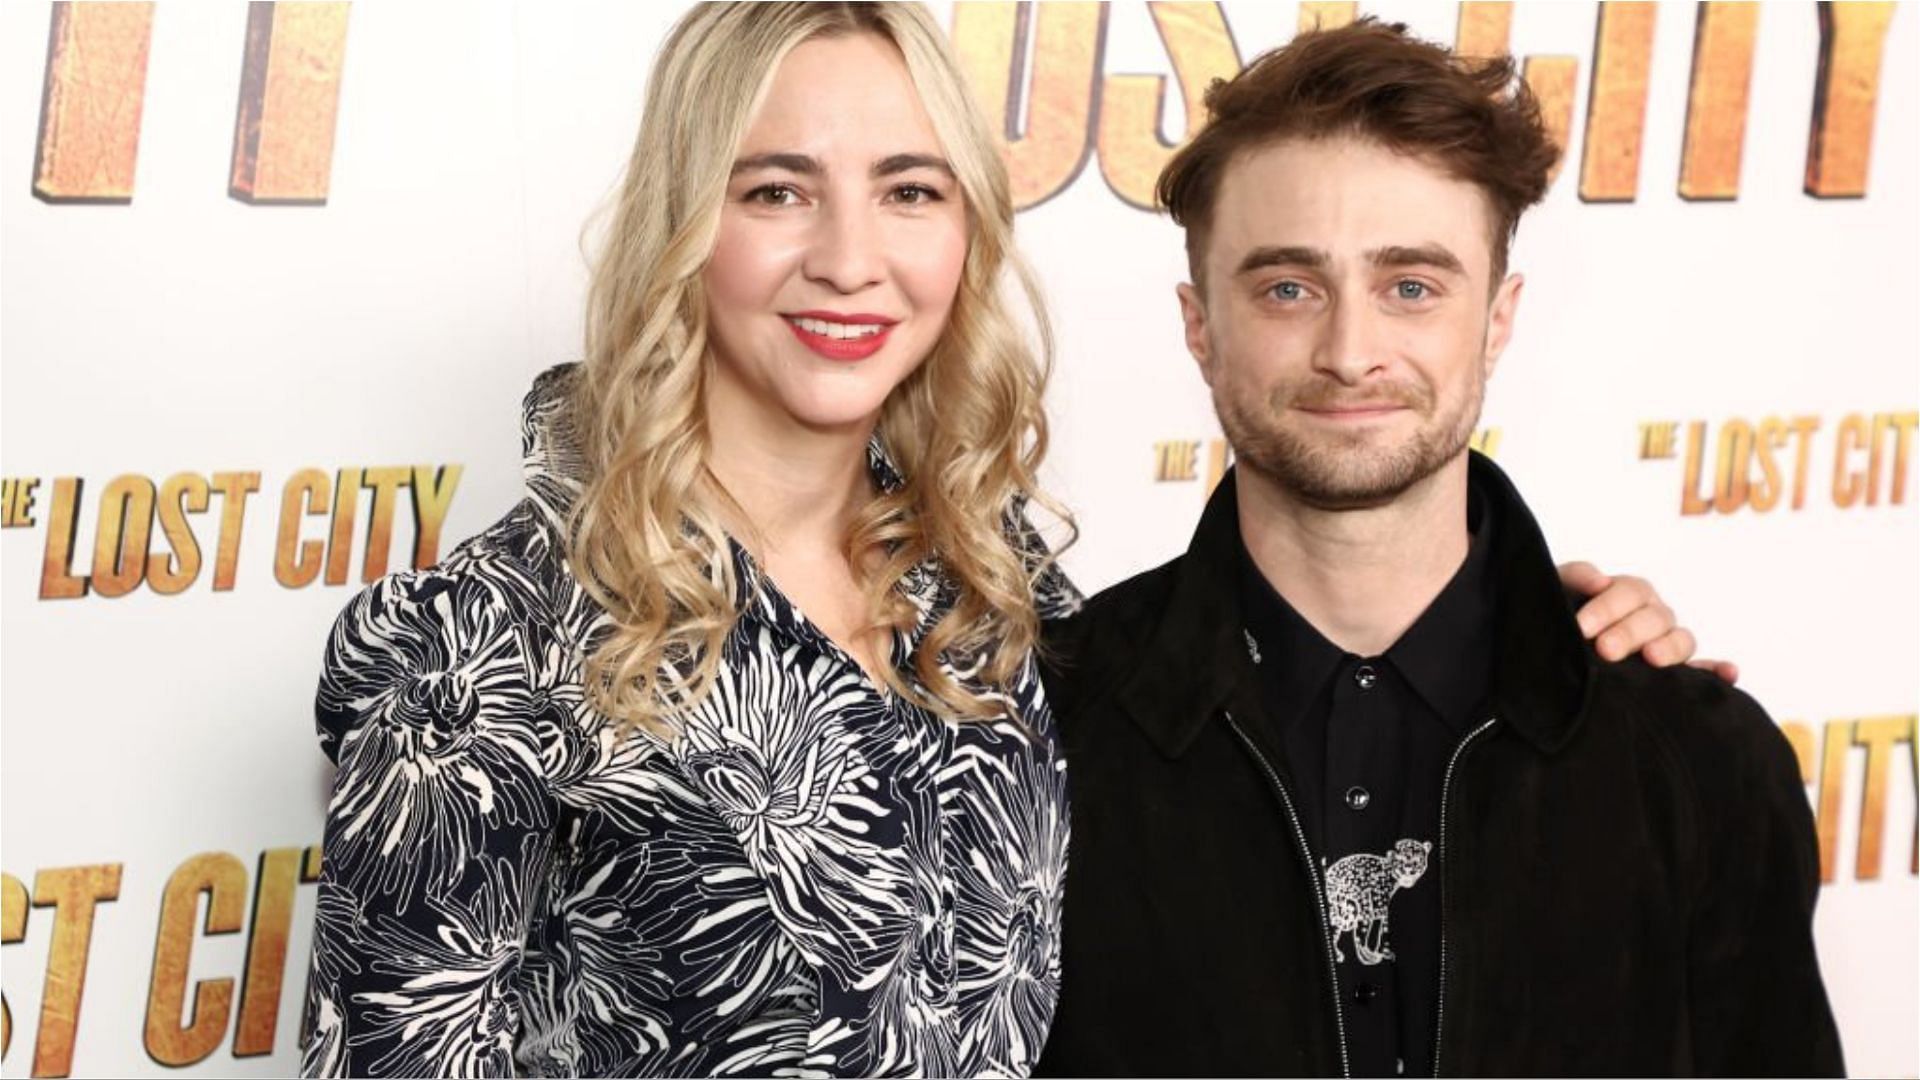 Daniel Radcliffe and Erin Darke are expecting their first child (Image via Arturo Holmes/Getty Images)